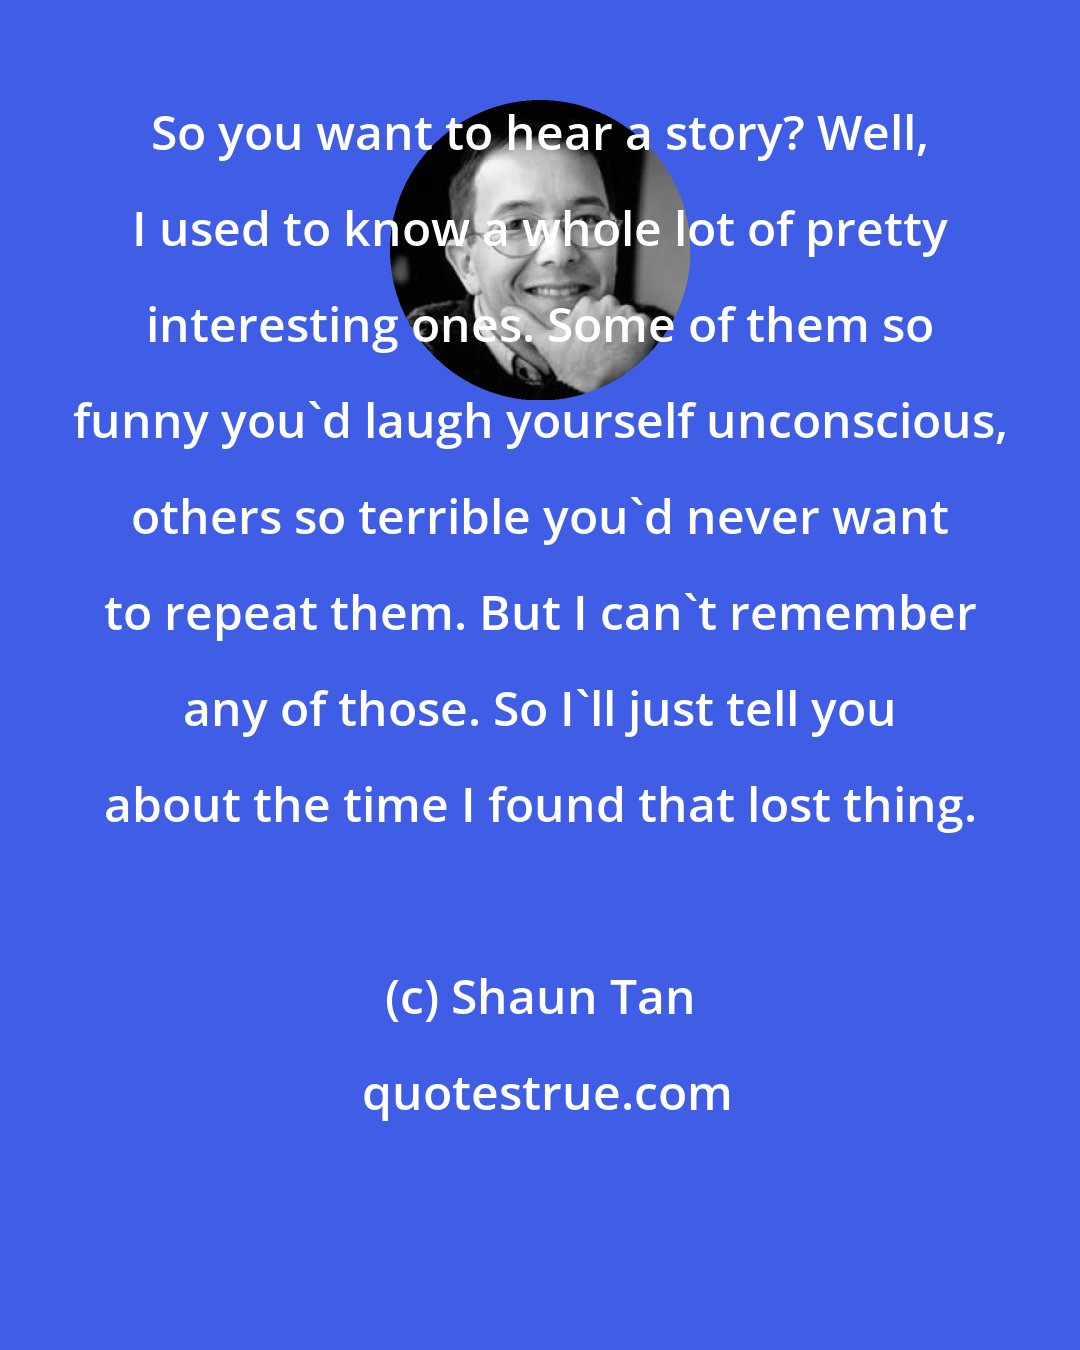 Shaun Tan: So you want to hear a story? Well, I used to know a whole lot of pretty interesting ones. Some of them so funny you'd laugh yourself unconscious, others so terrible you'd never want to repeat them. But I can't remember any of those. So I'll just tell you about the time I found that lost thing.